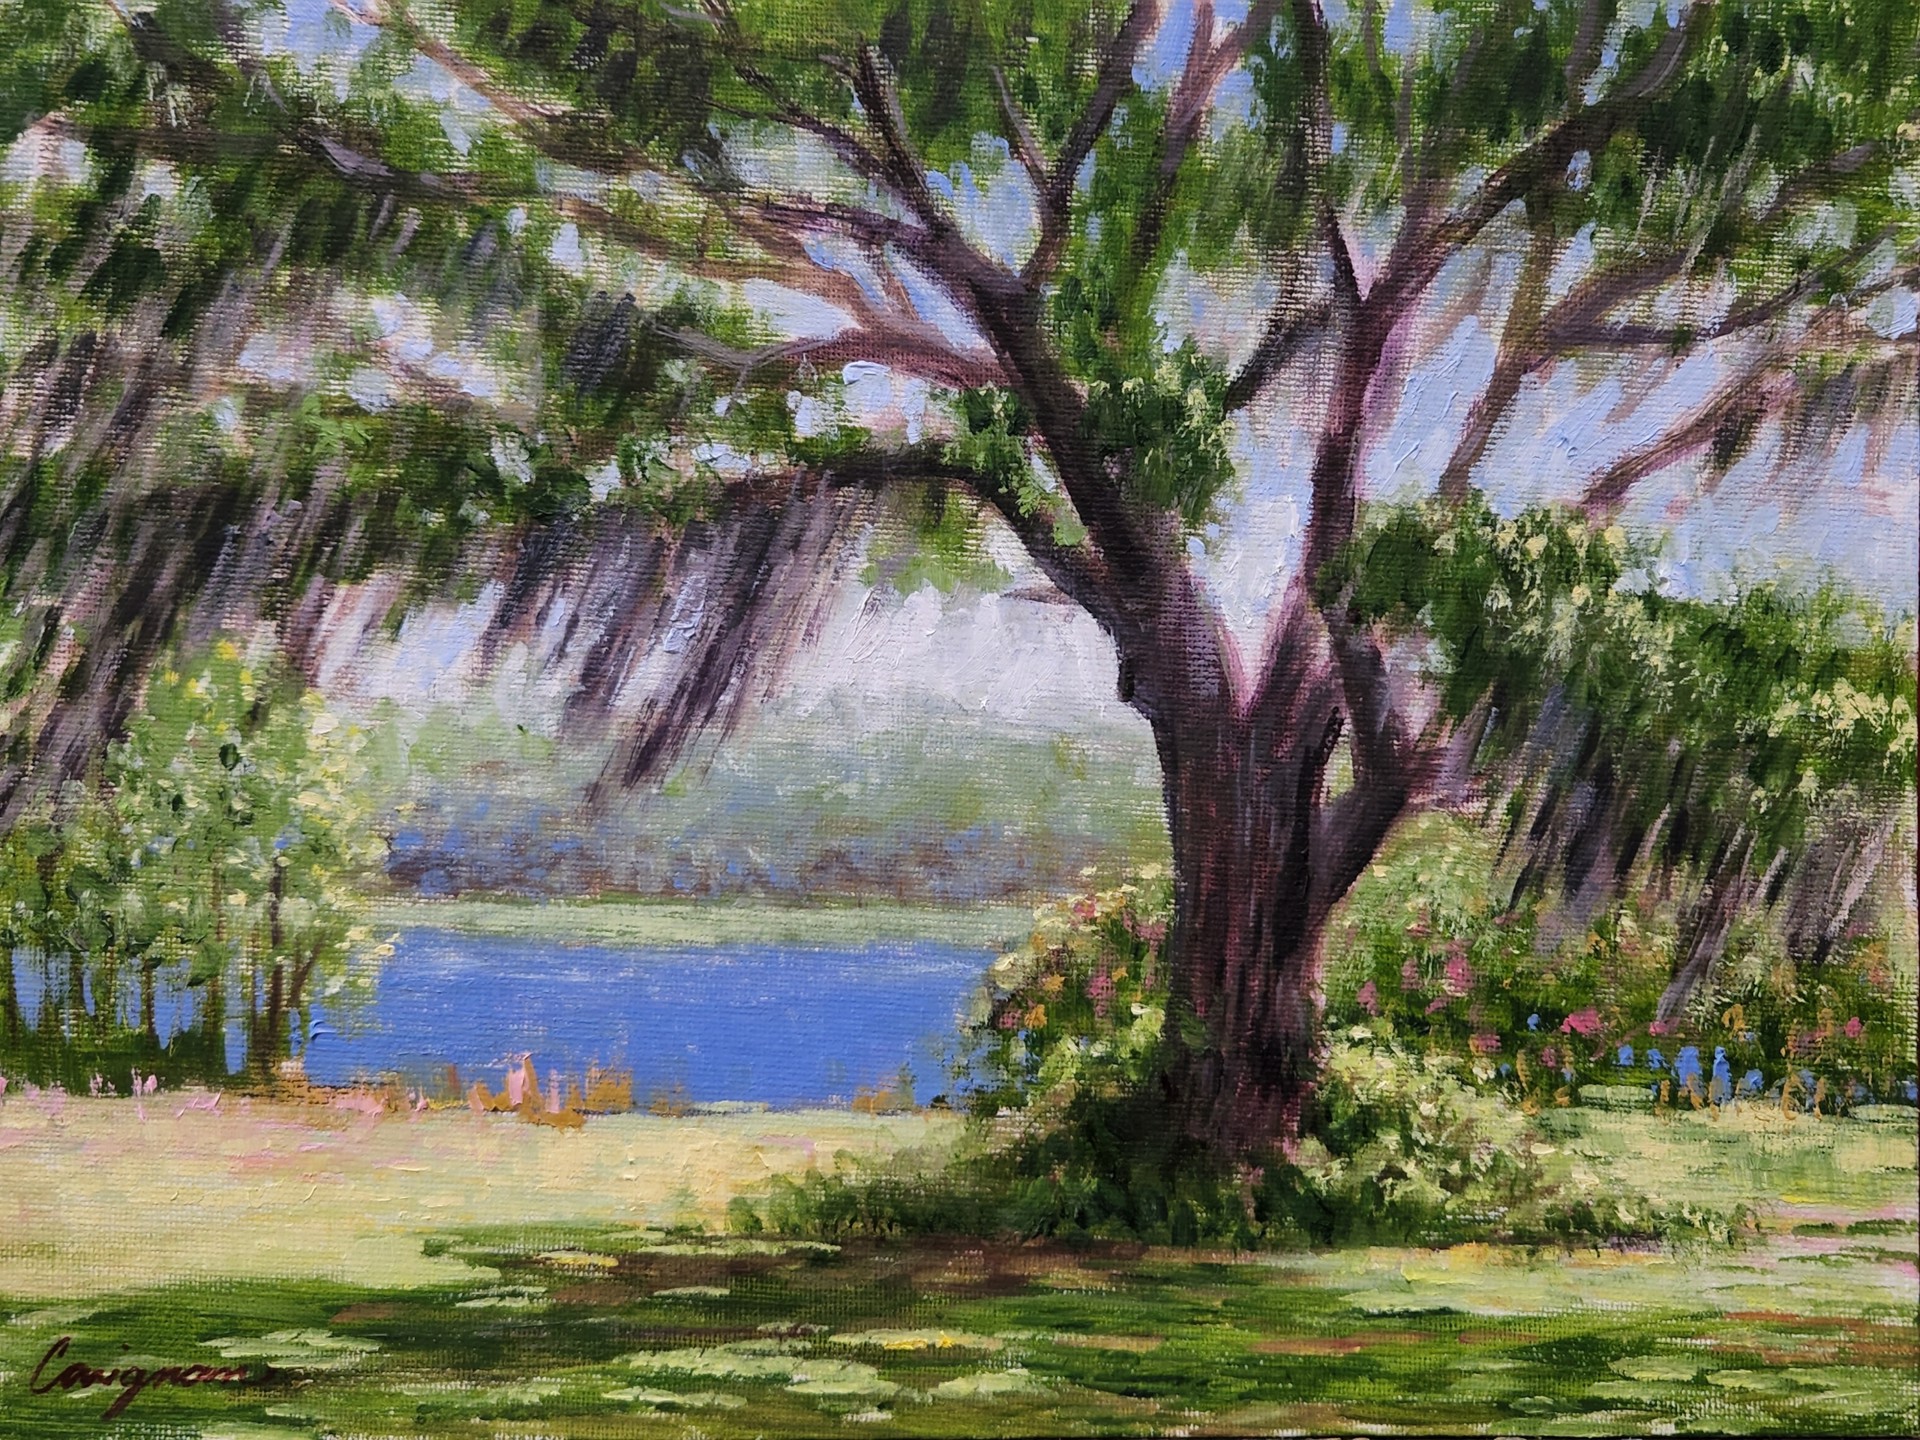 Oak By The River by Todd Carignan